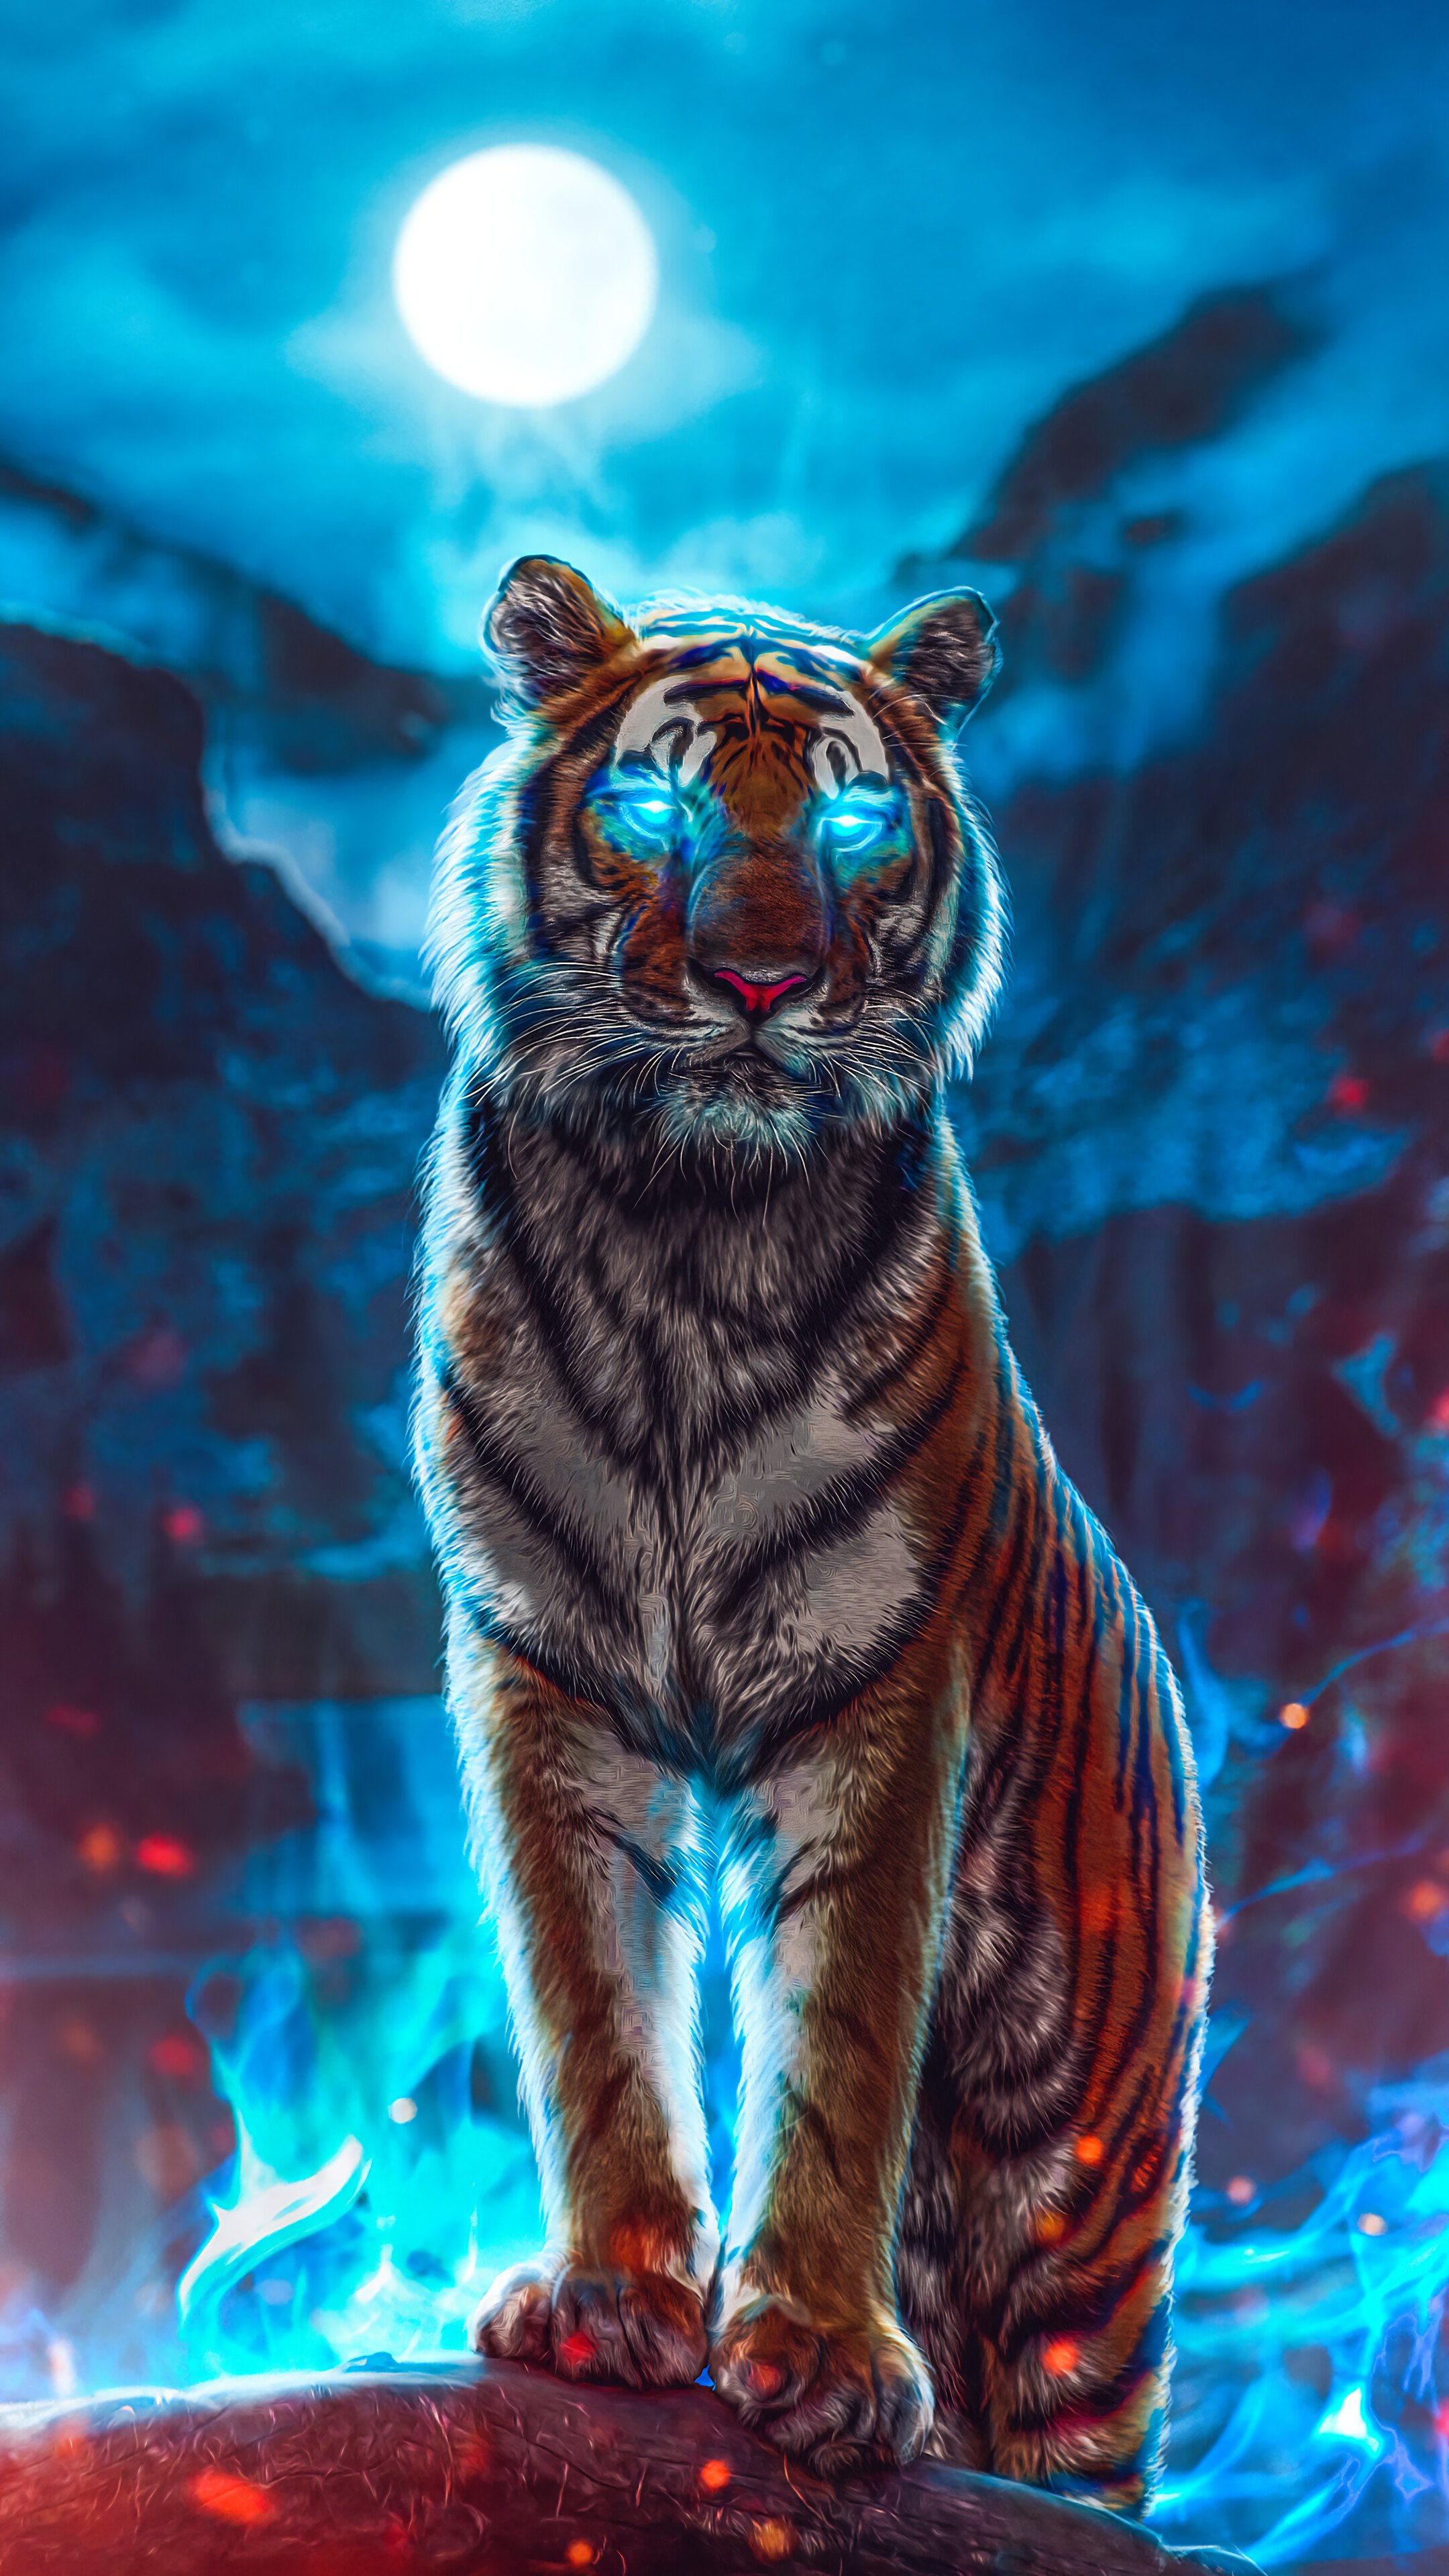 Tiger, Glowing, Eyes, 4K phone HD Wallpaper, Image, Background, Photo and Picture HD Wallpaper